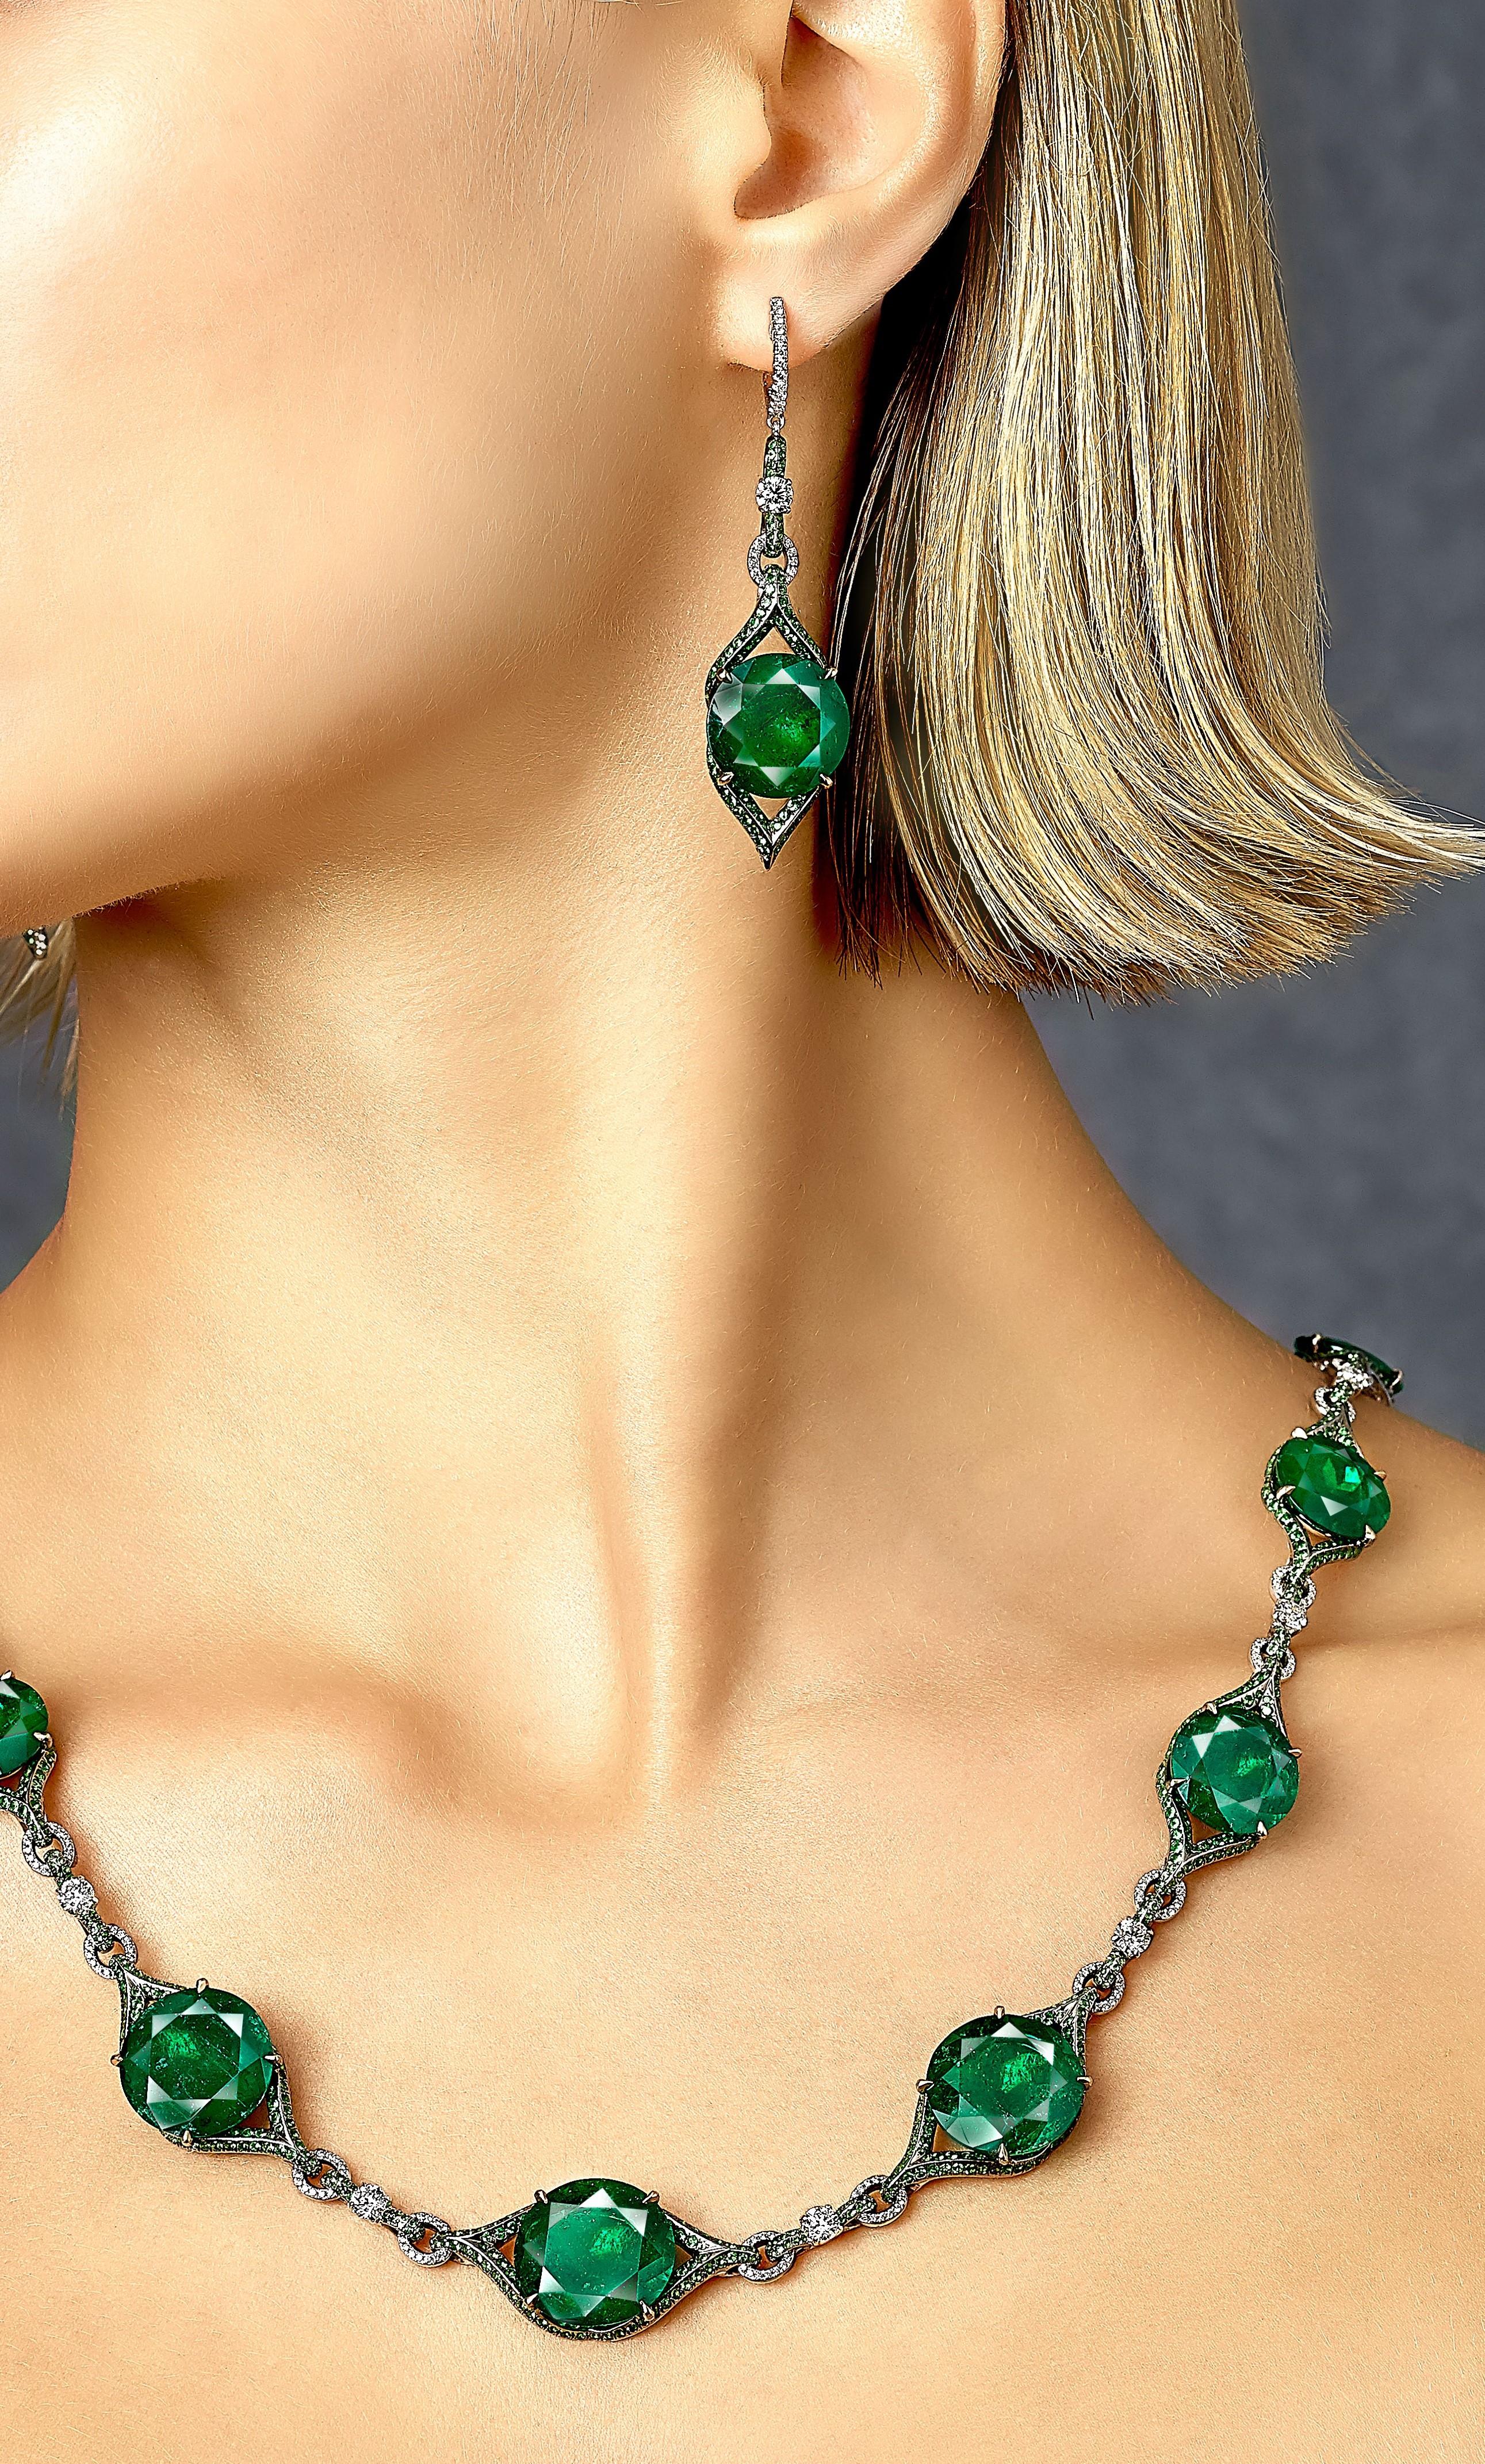 Vihari Jewels created these captivating Colombian Emerald earrings featuring a 7.93 carat (Gubelin Certificate Report #18031124) and a 8.62 carat (Gubelin Certificate Report #18031116) emeralds. The emeralds are vivid green in coloration and are